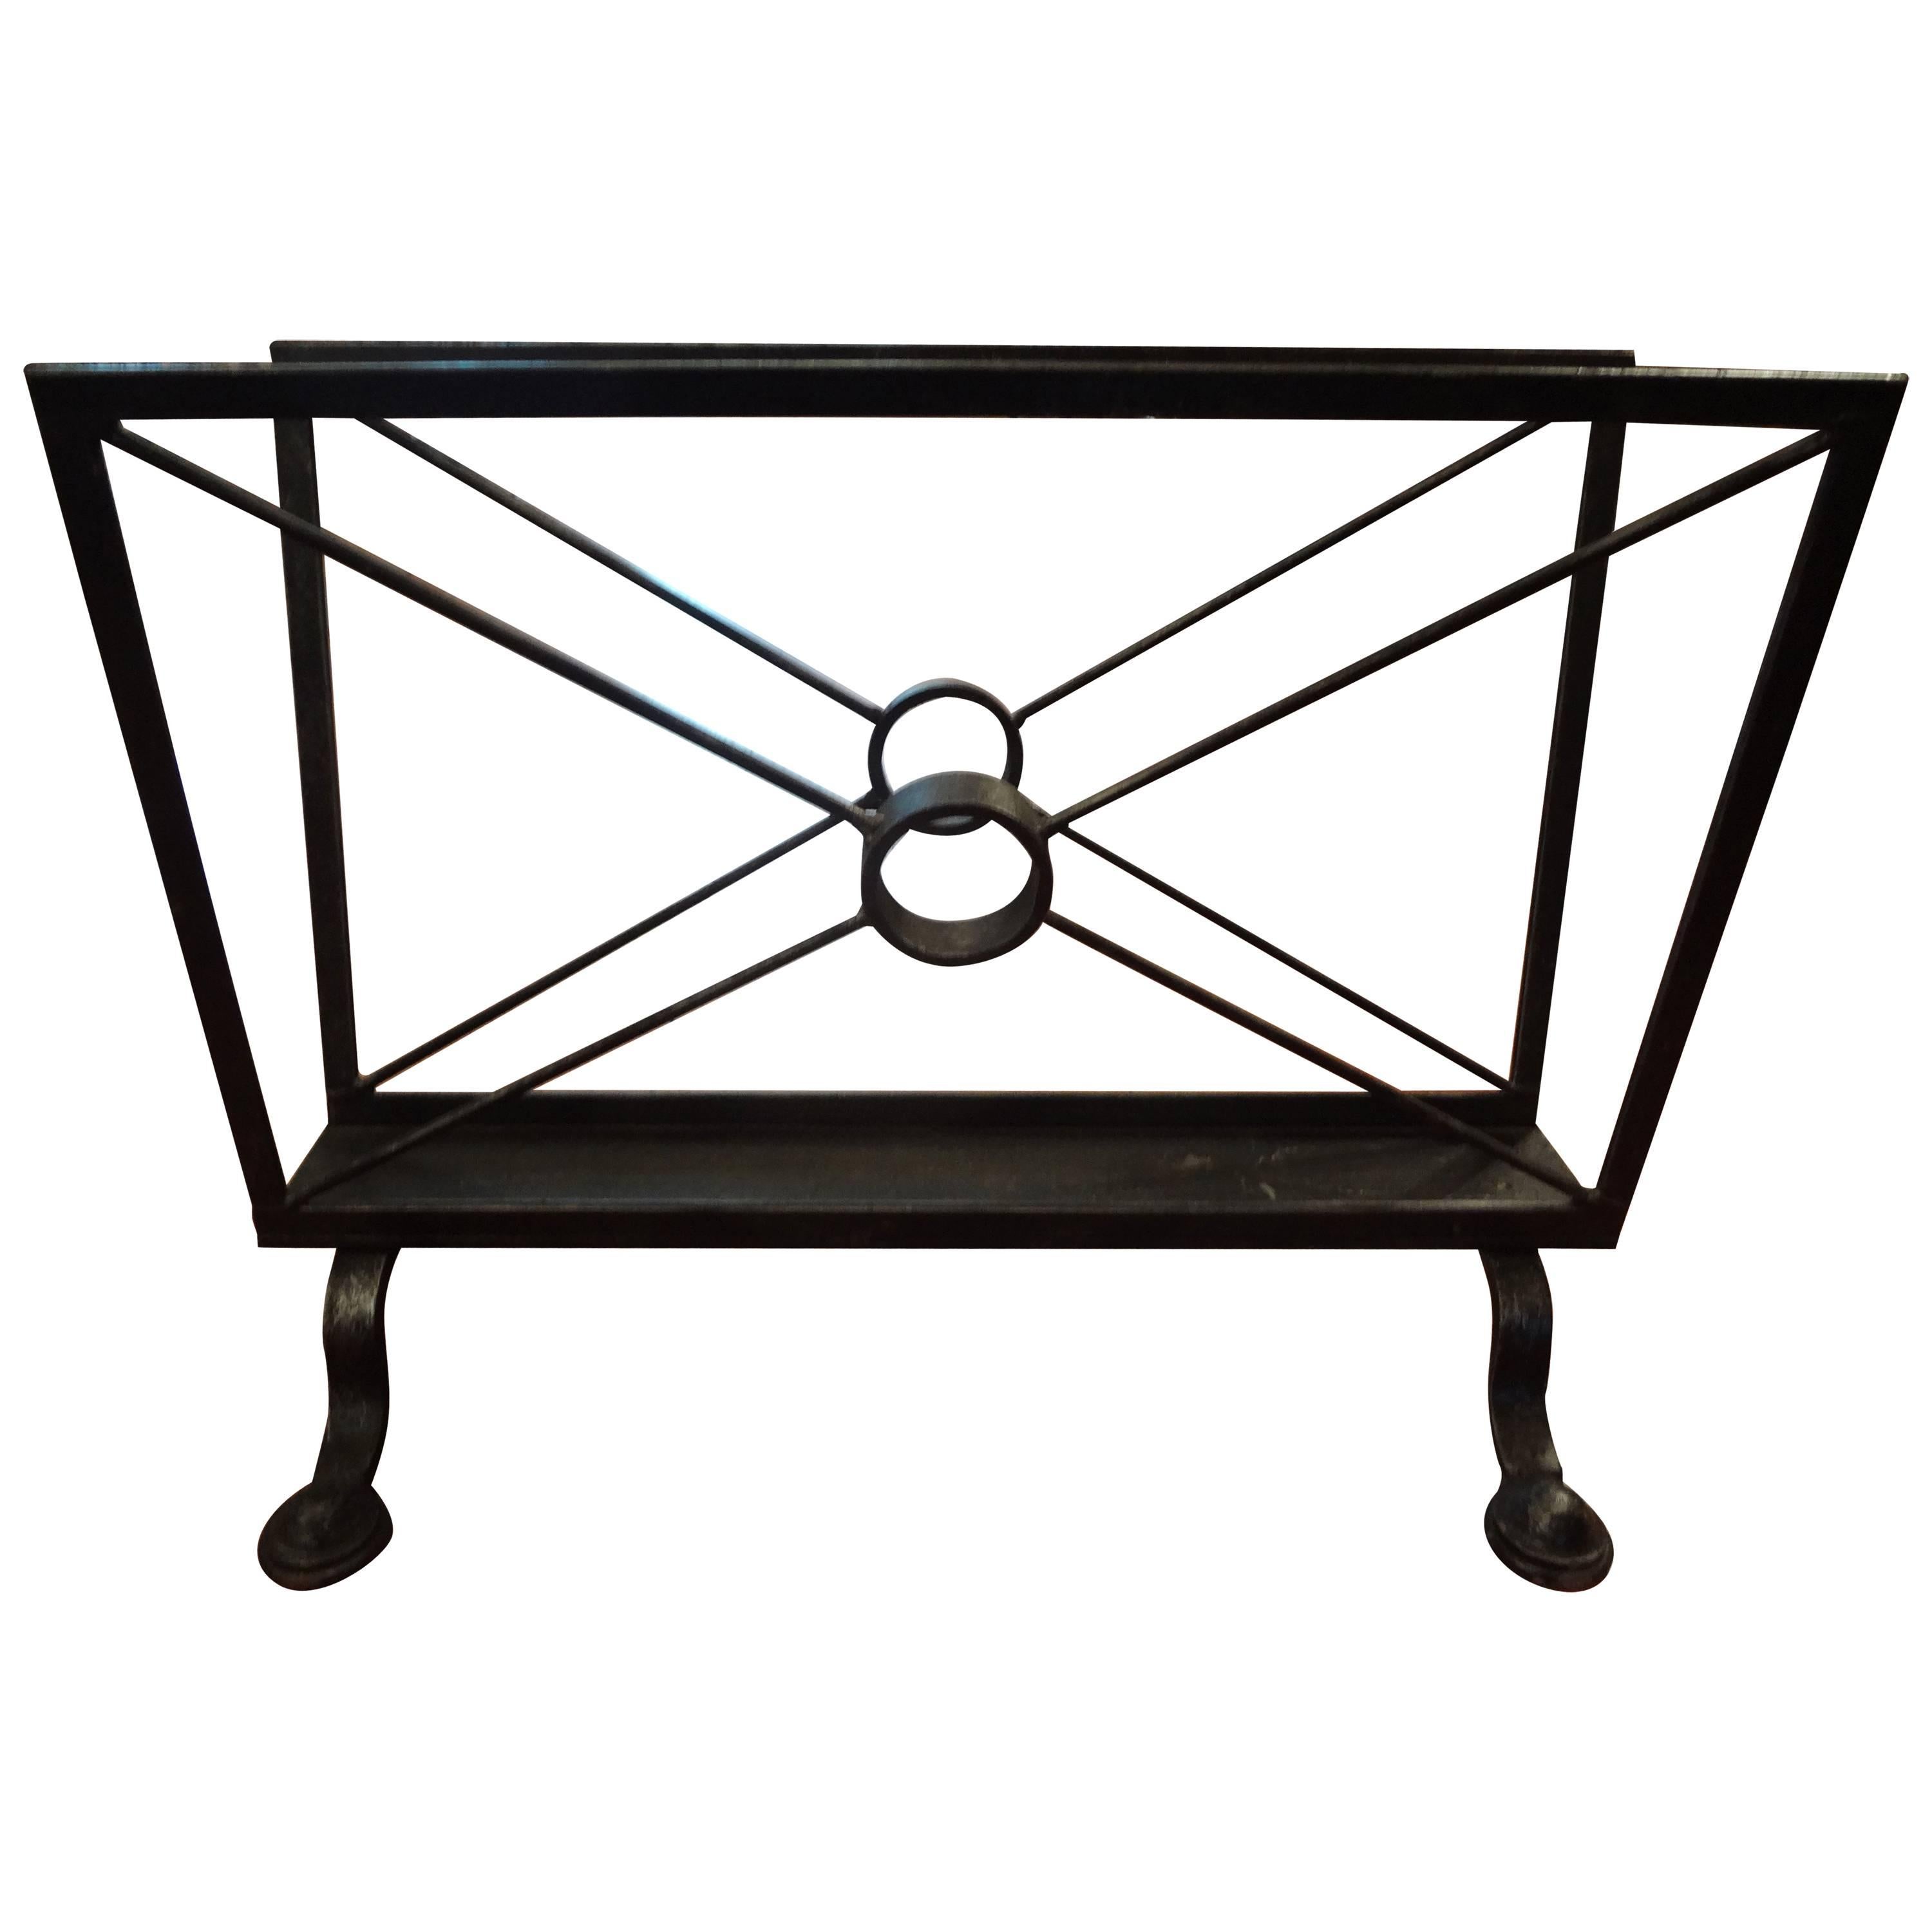 Vintage Wrought Iron Magazine Rack Inspired by Tommi Parzinger